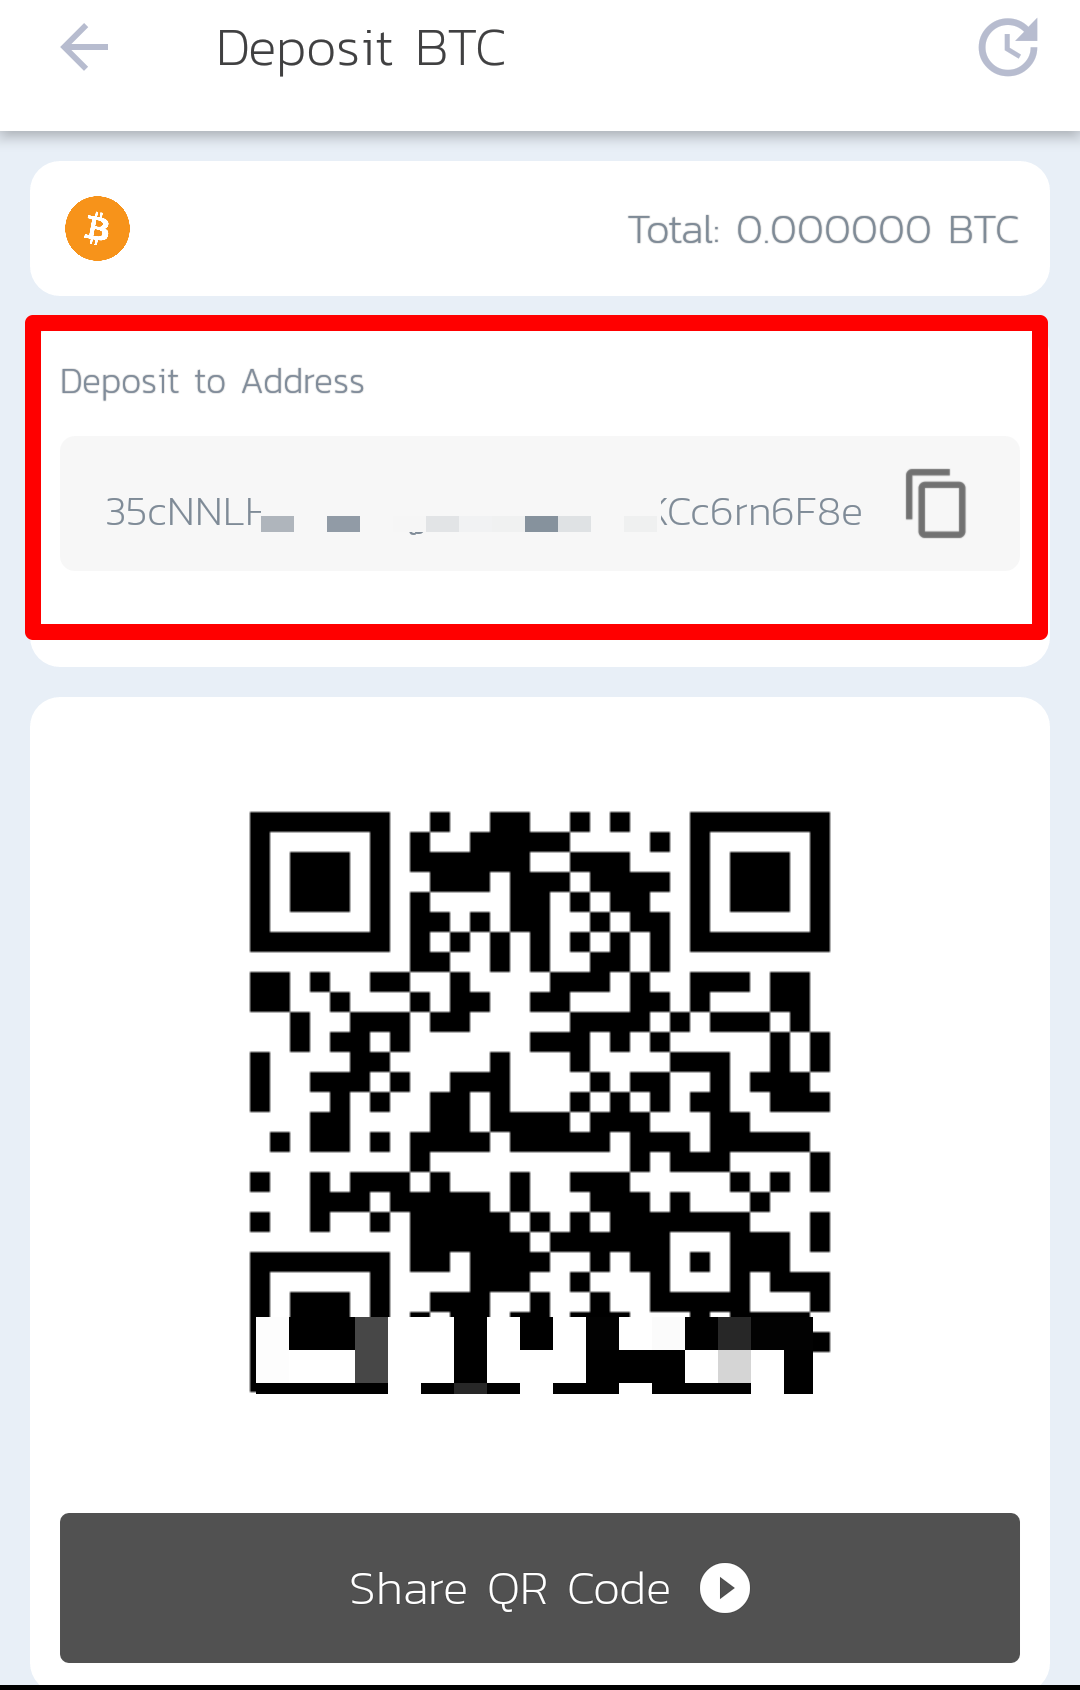 Why do we ask you to verify your bitcoin address? - Bitonic